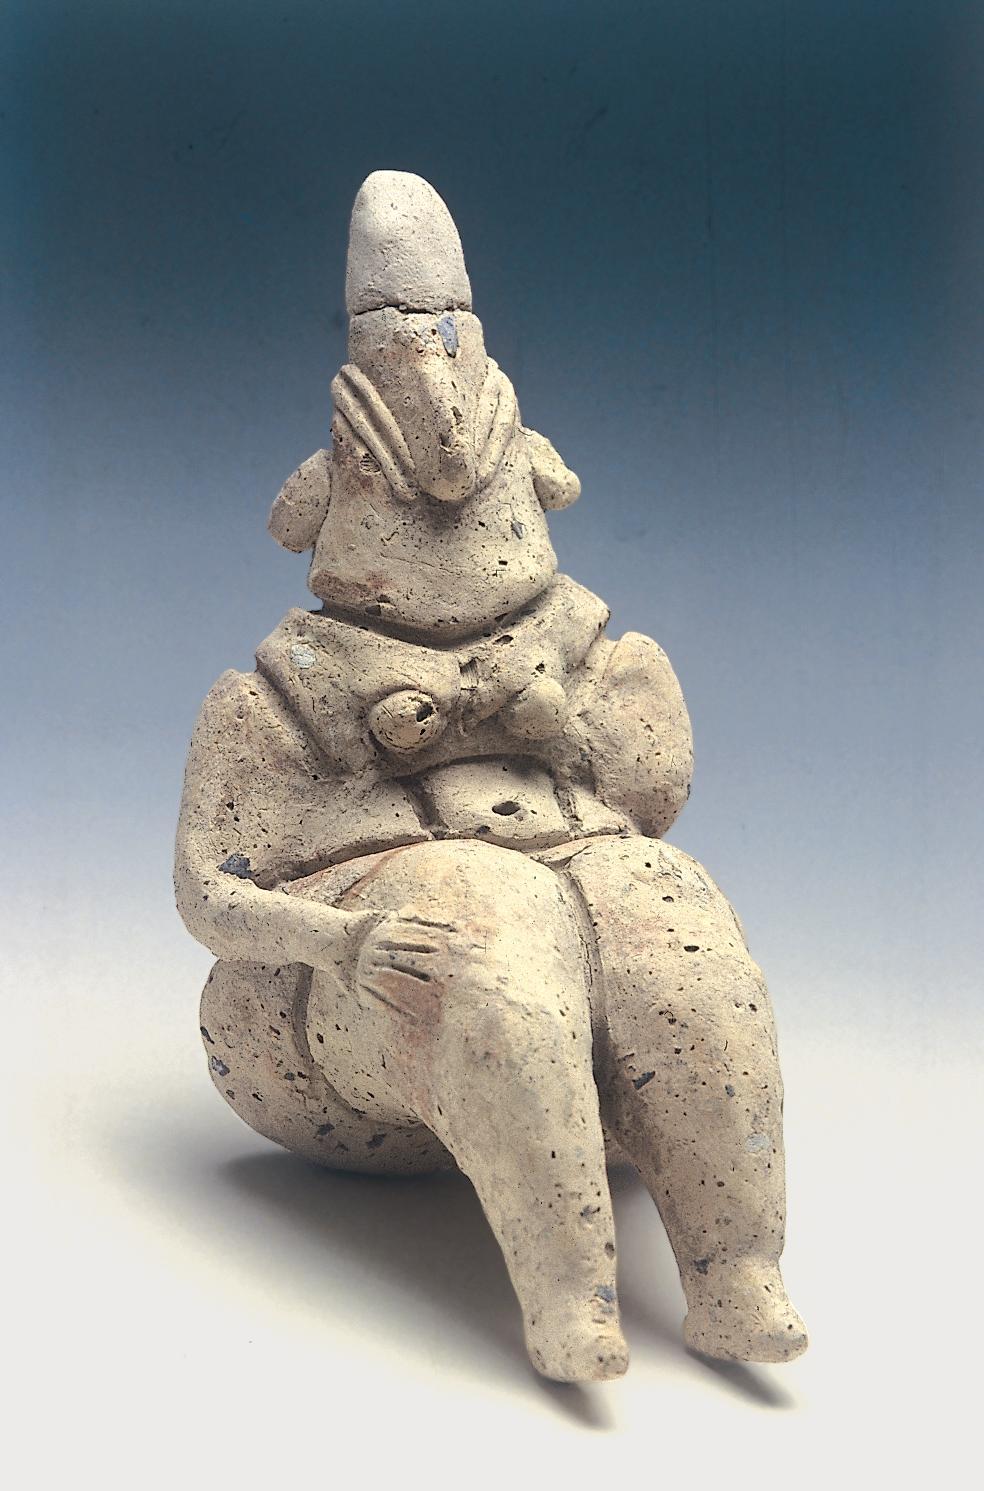 Clay figurine of the "Mother Godess" figurine